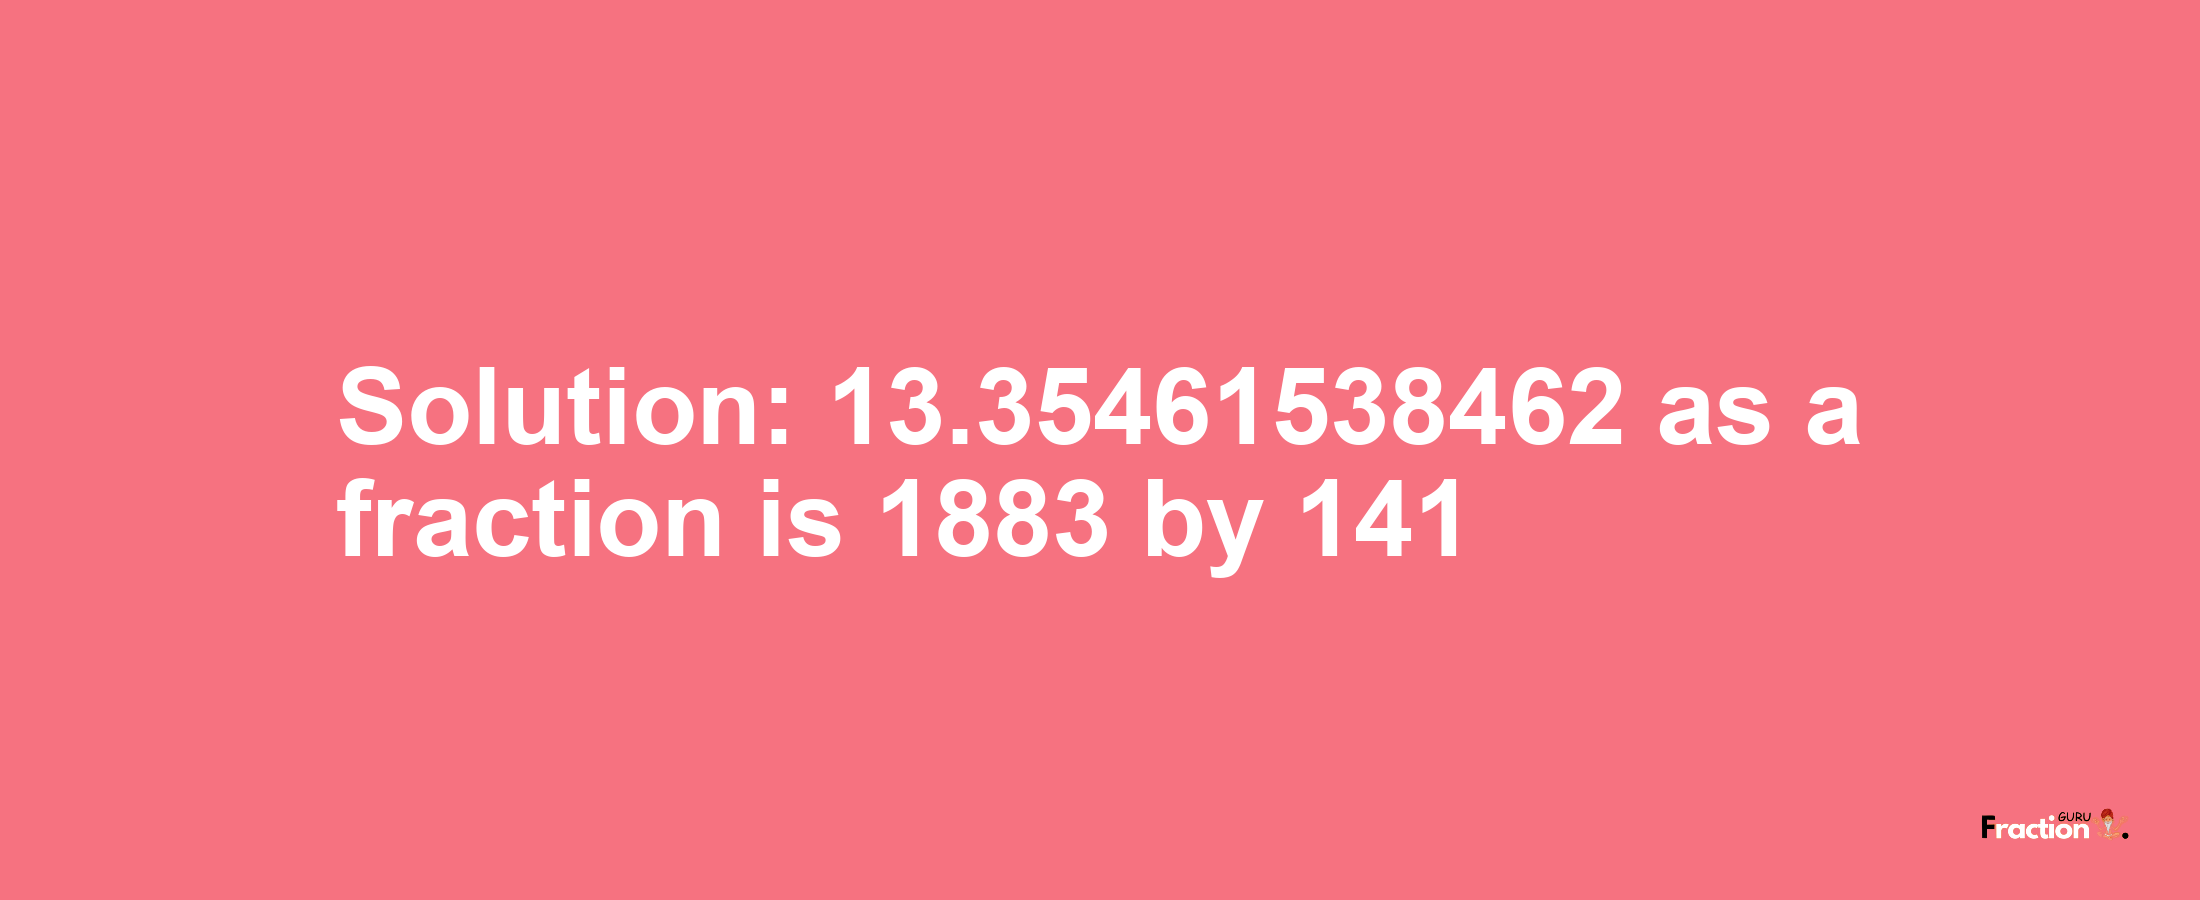 Solution:13.35461538462 as a fraction is 1883/141